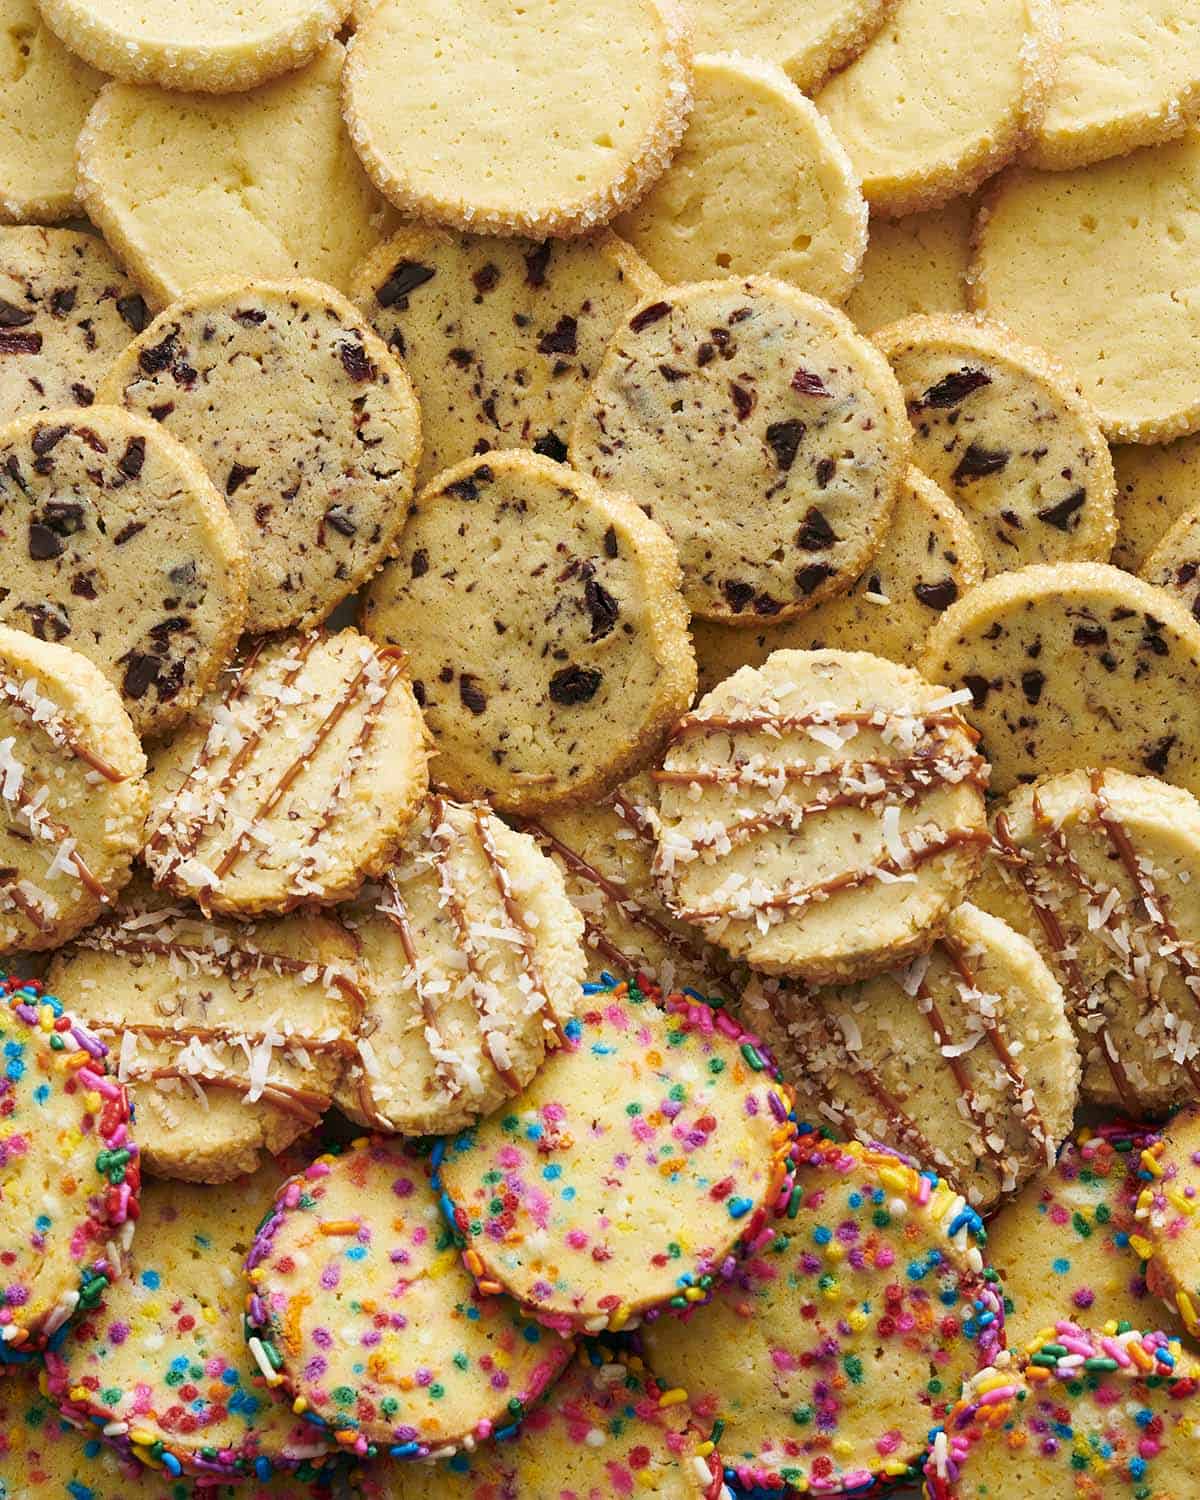 A photo of shortbread cookies, plain, with chocolate chips, caramel and sprinkles.